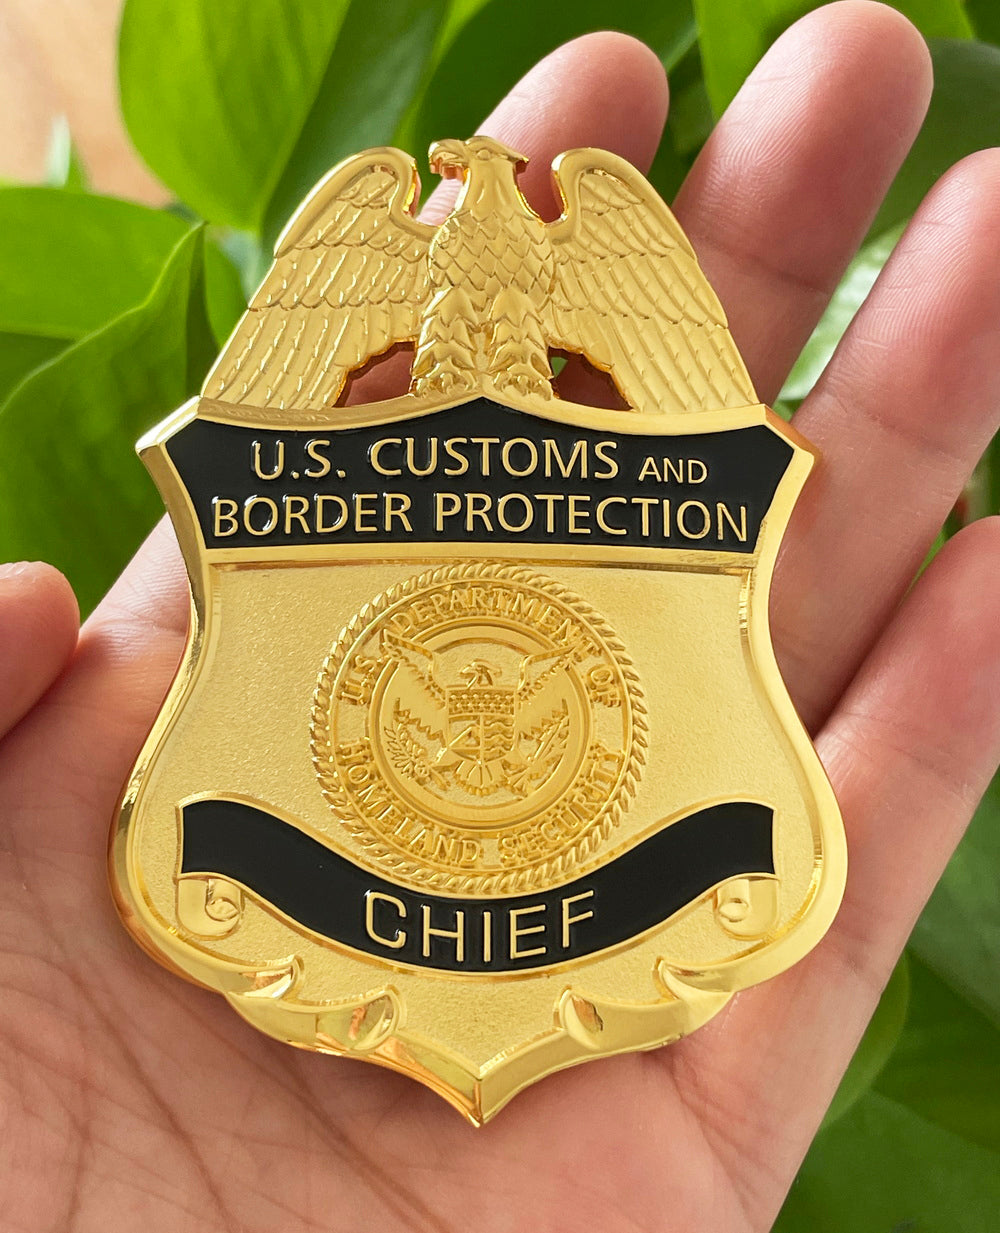 US CBP Chief Customs and Border Protection Badge Replica Movie Props